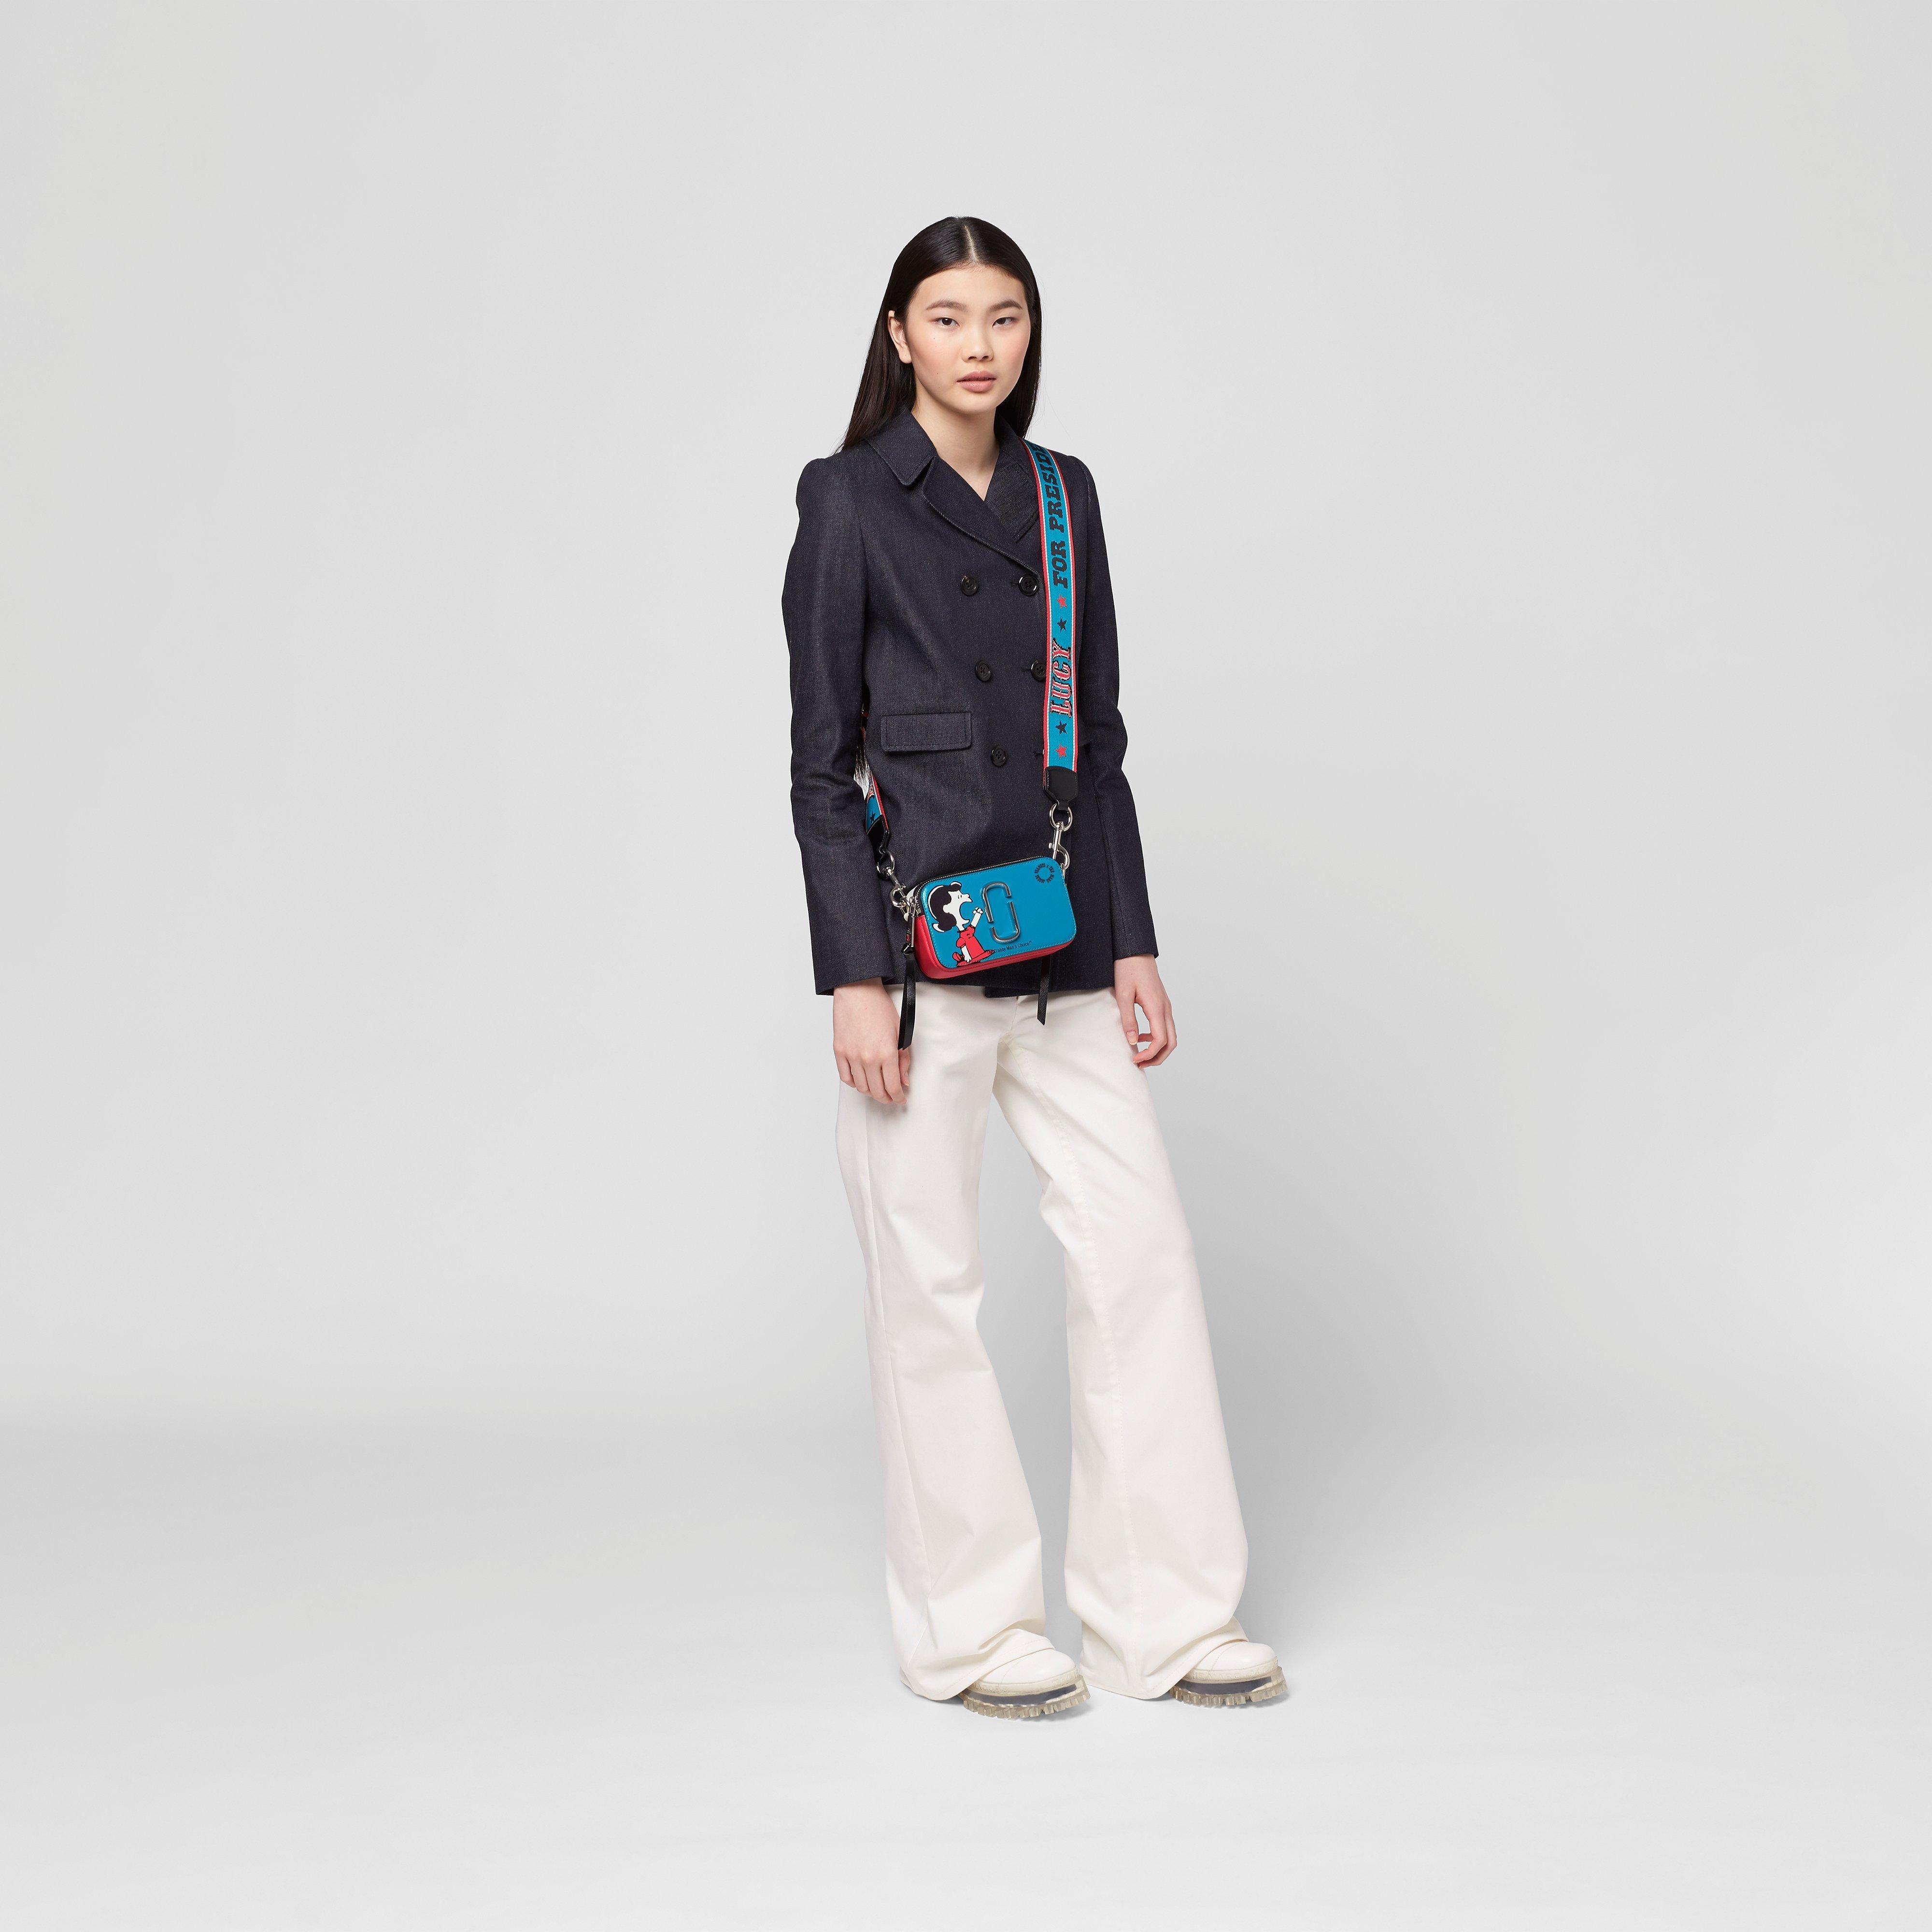 Marc Jacobs Leather Peanuts X The Snapshot Crossbody Bag - Blue/Multi/ $350